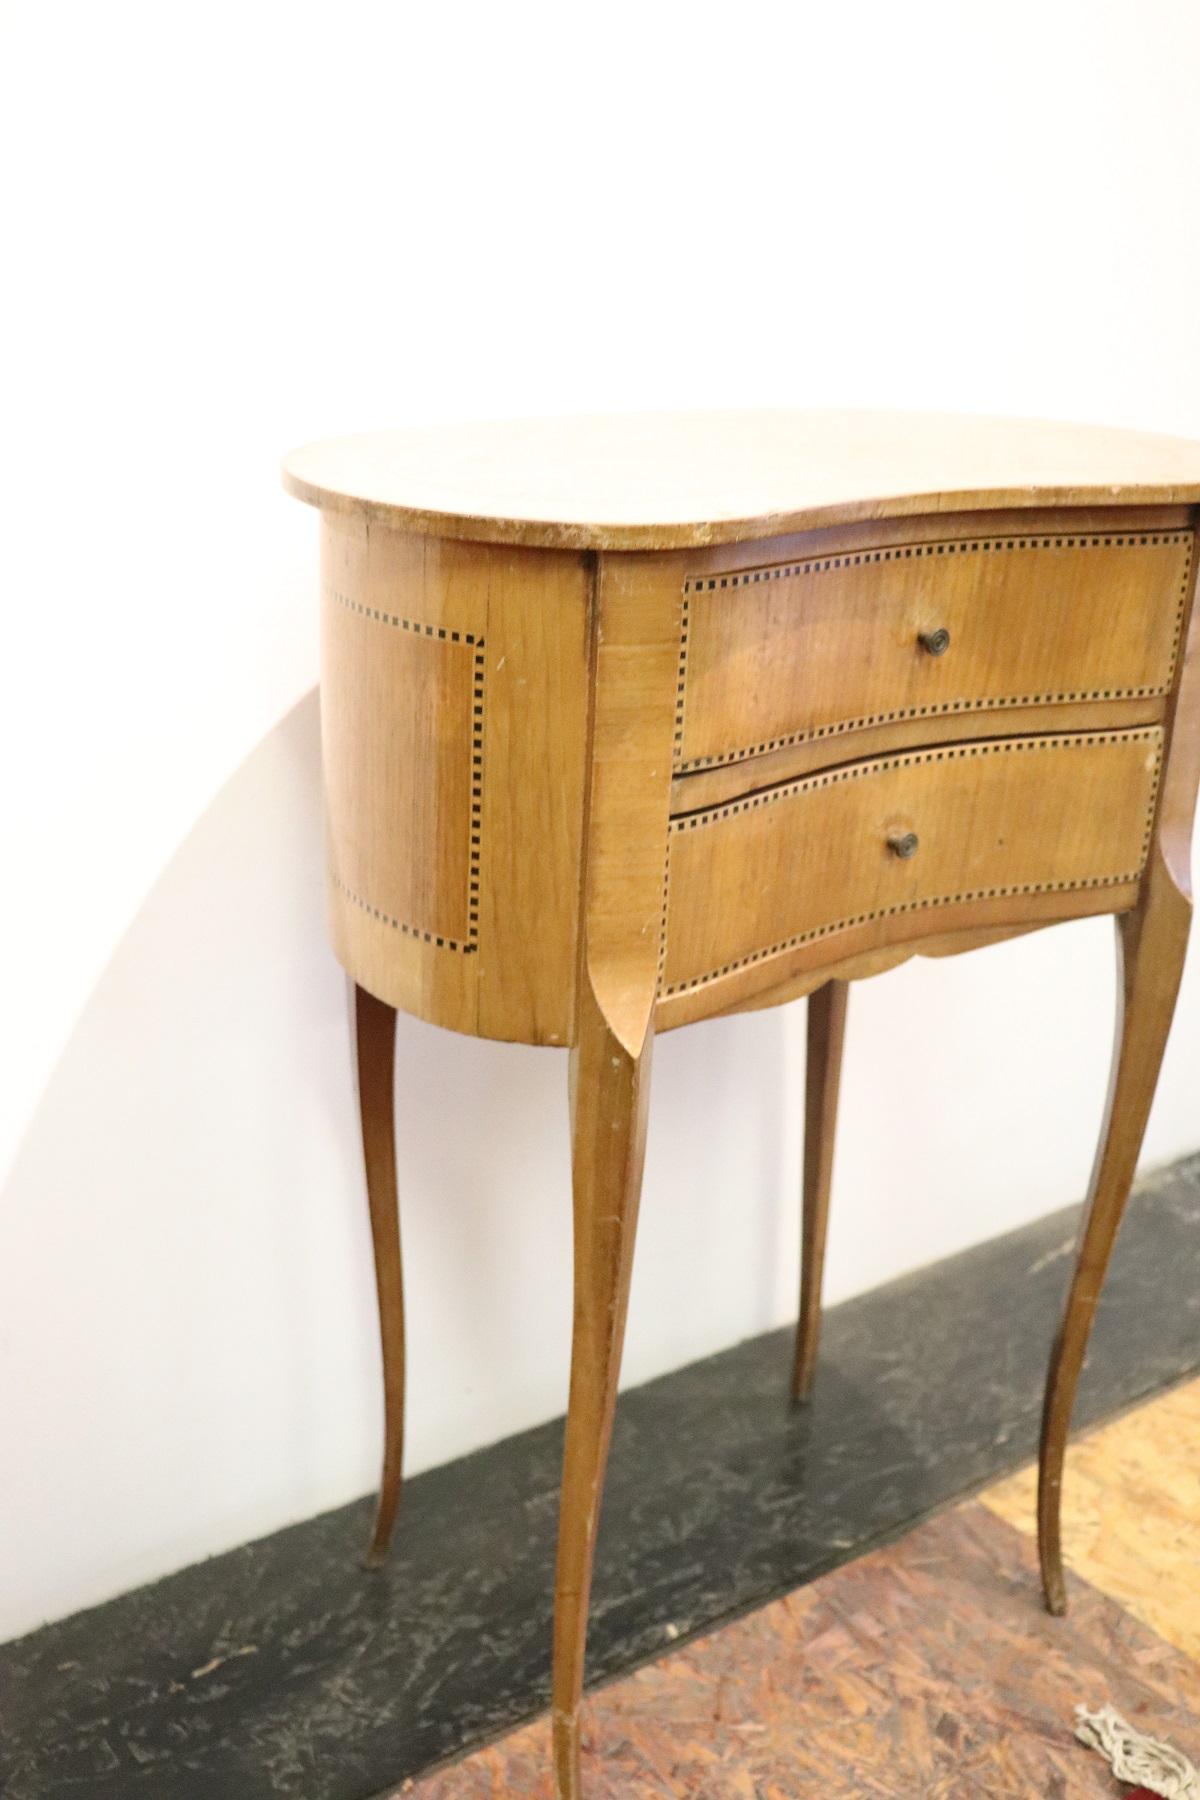 Rare and fine quality Italian Louis XV style 1970s side table or nightstand in inlay wood with geometric pattern. The side table has a particular bean shape, the legs are long and slender. The decoration is on each side so you can place the table